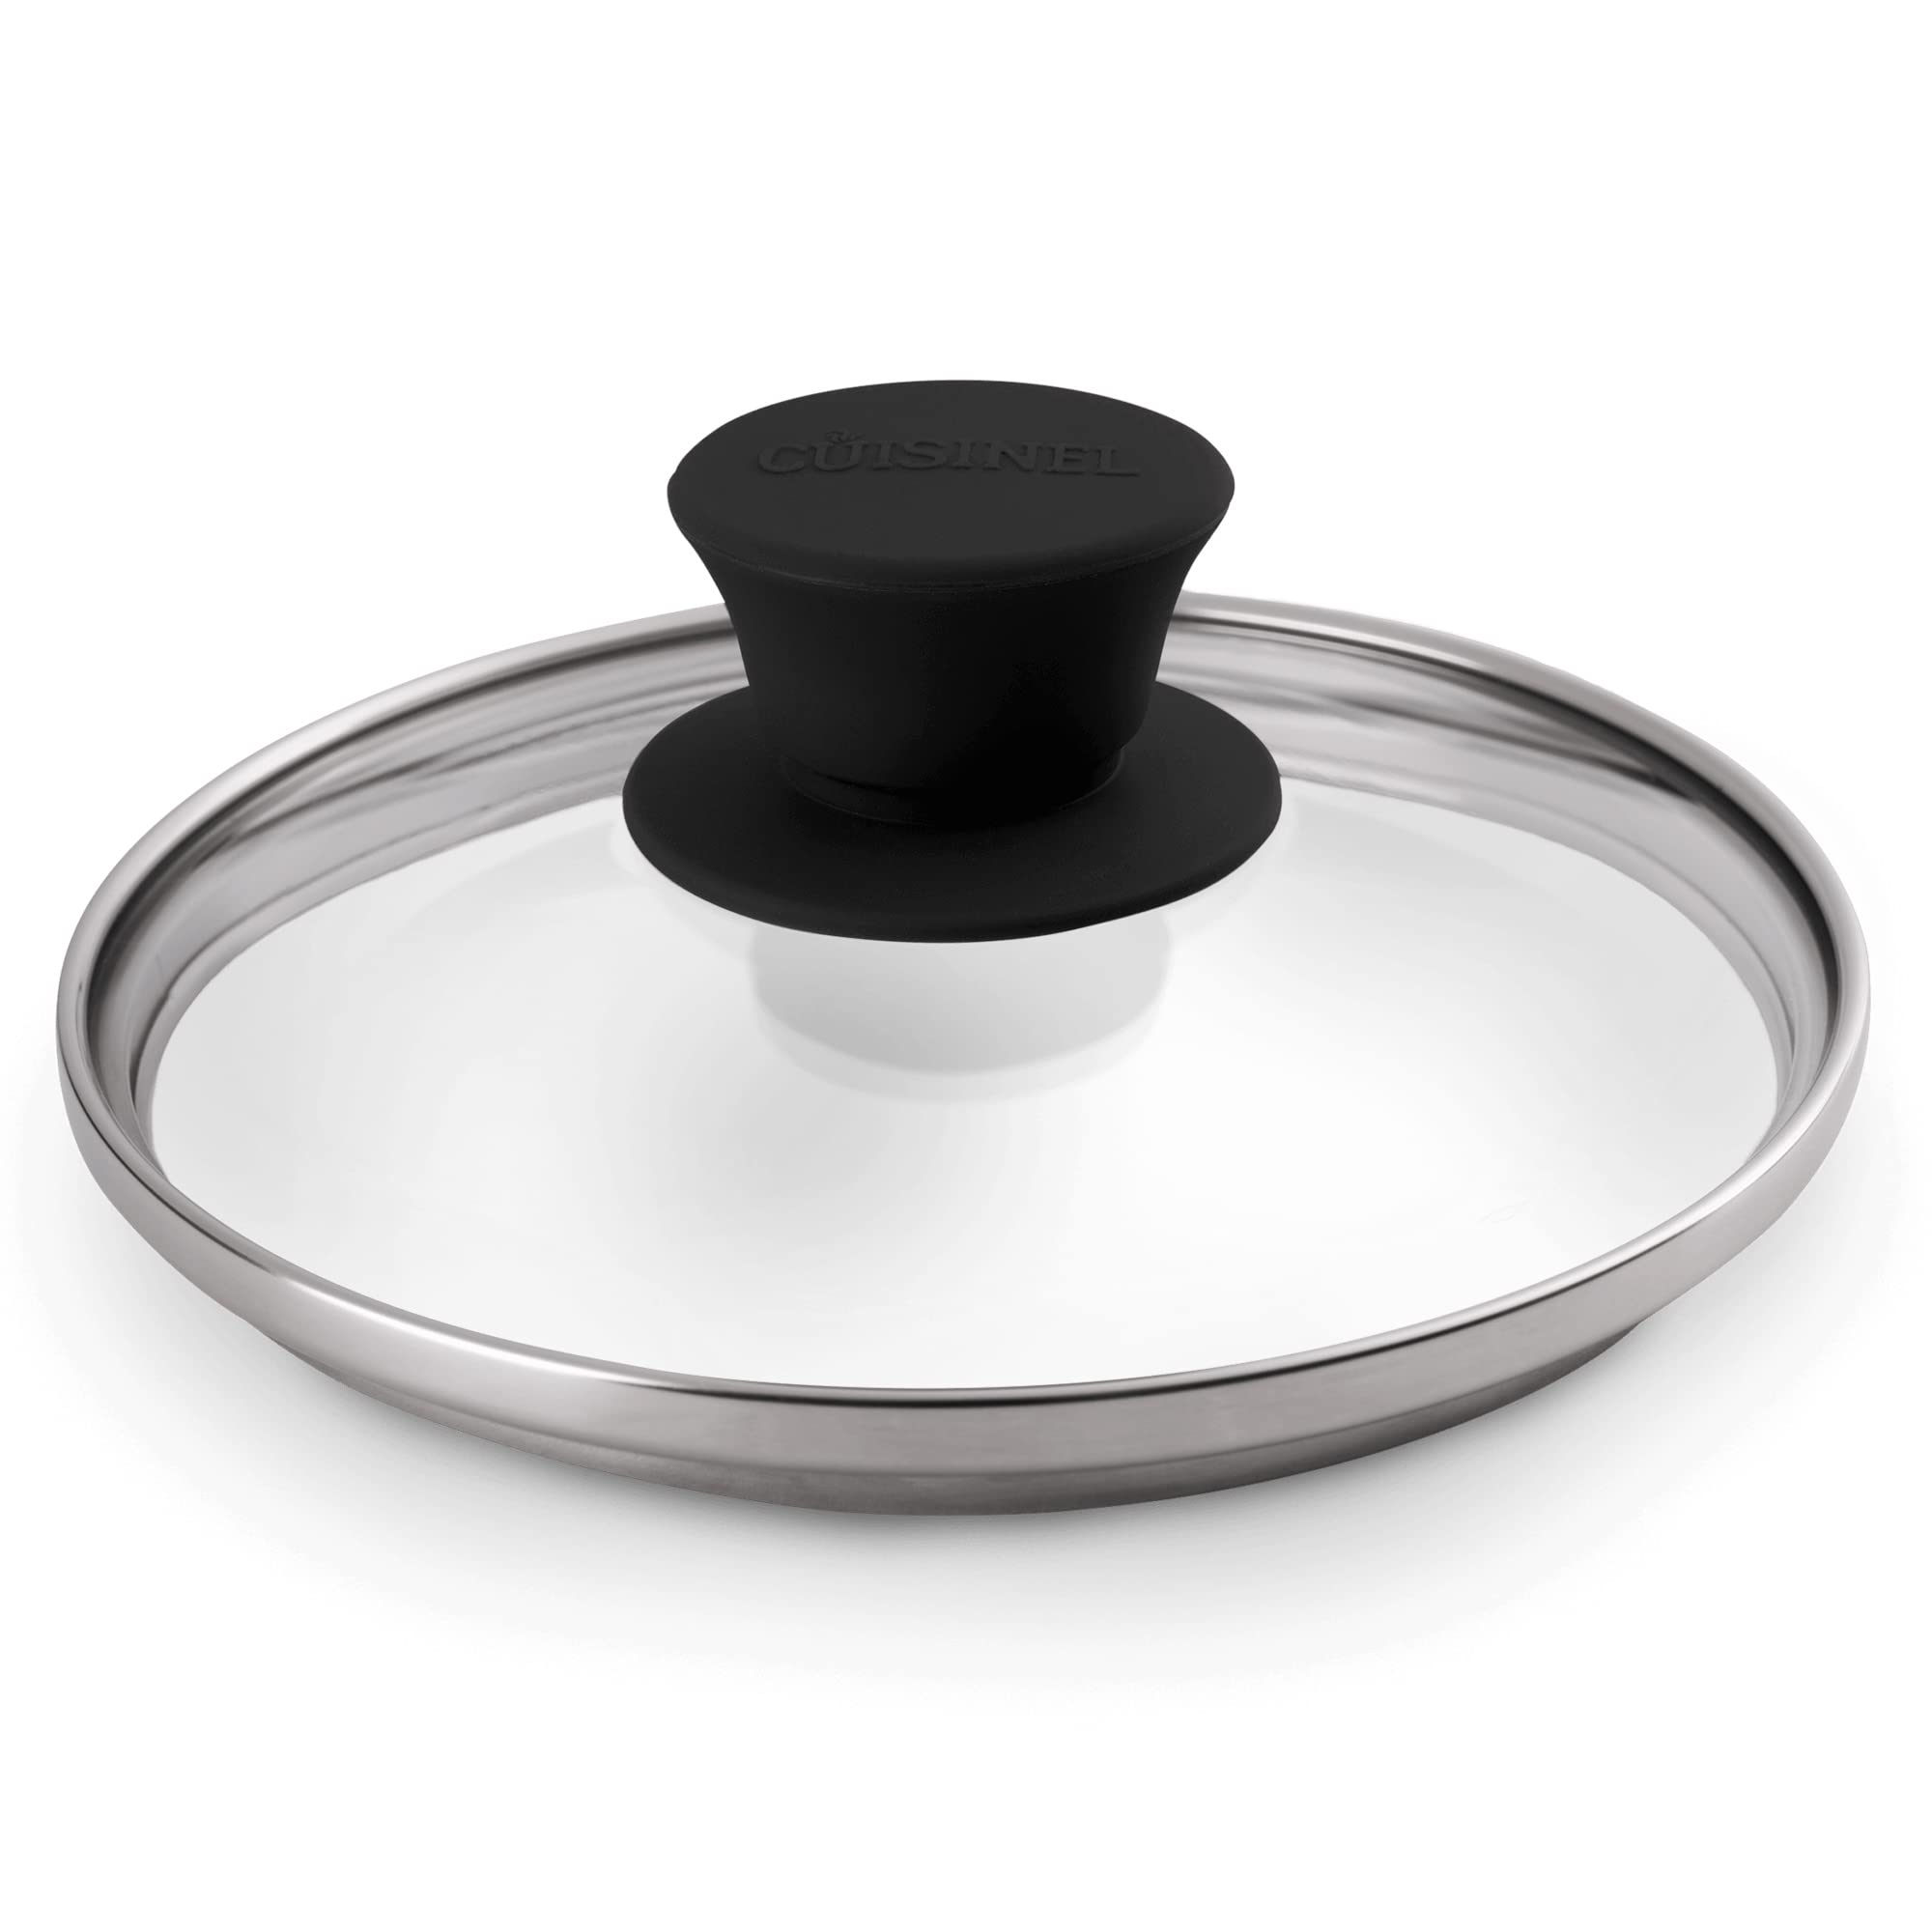 Cuisinel Cast Iron Skillet Glass Covers with Steam Vent Hole - Fits Lodge - Lids for All Universal Cookware  - Like New